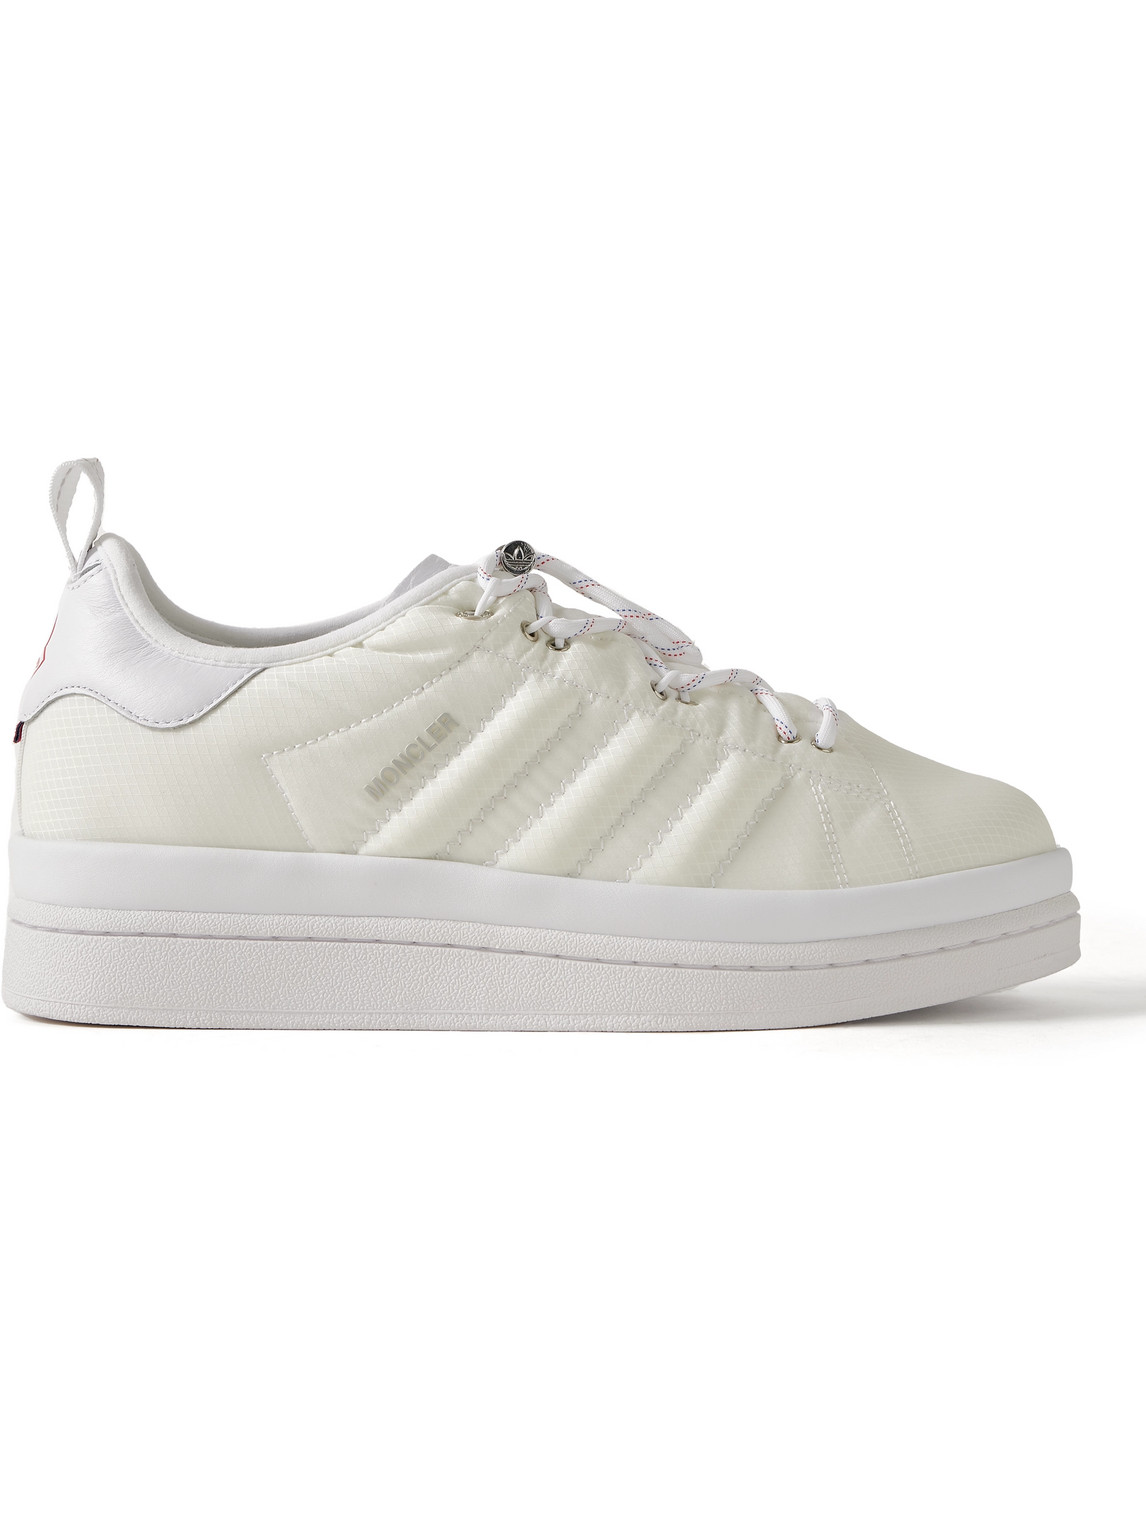 Moncler Genius Adidas Originals Campus Leather-trimmed Quilted Gore-tex™ Trainers In White